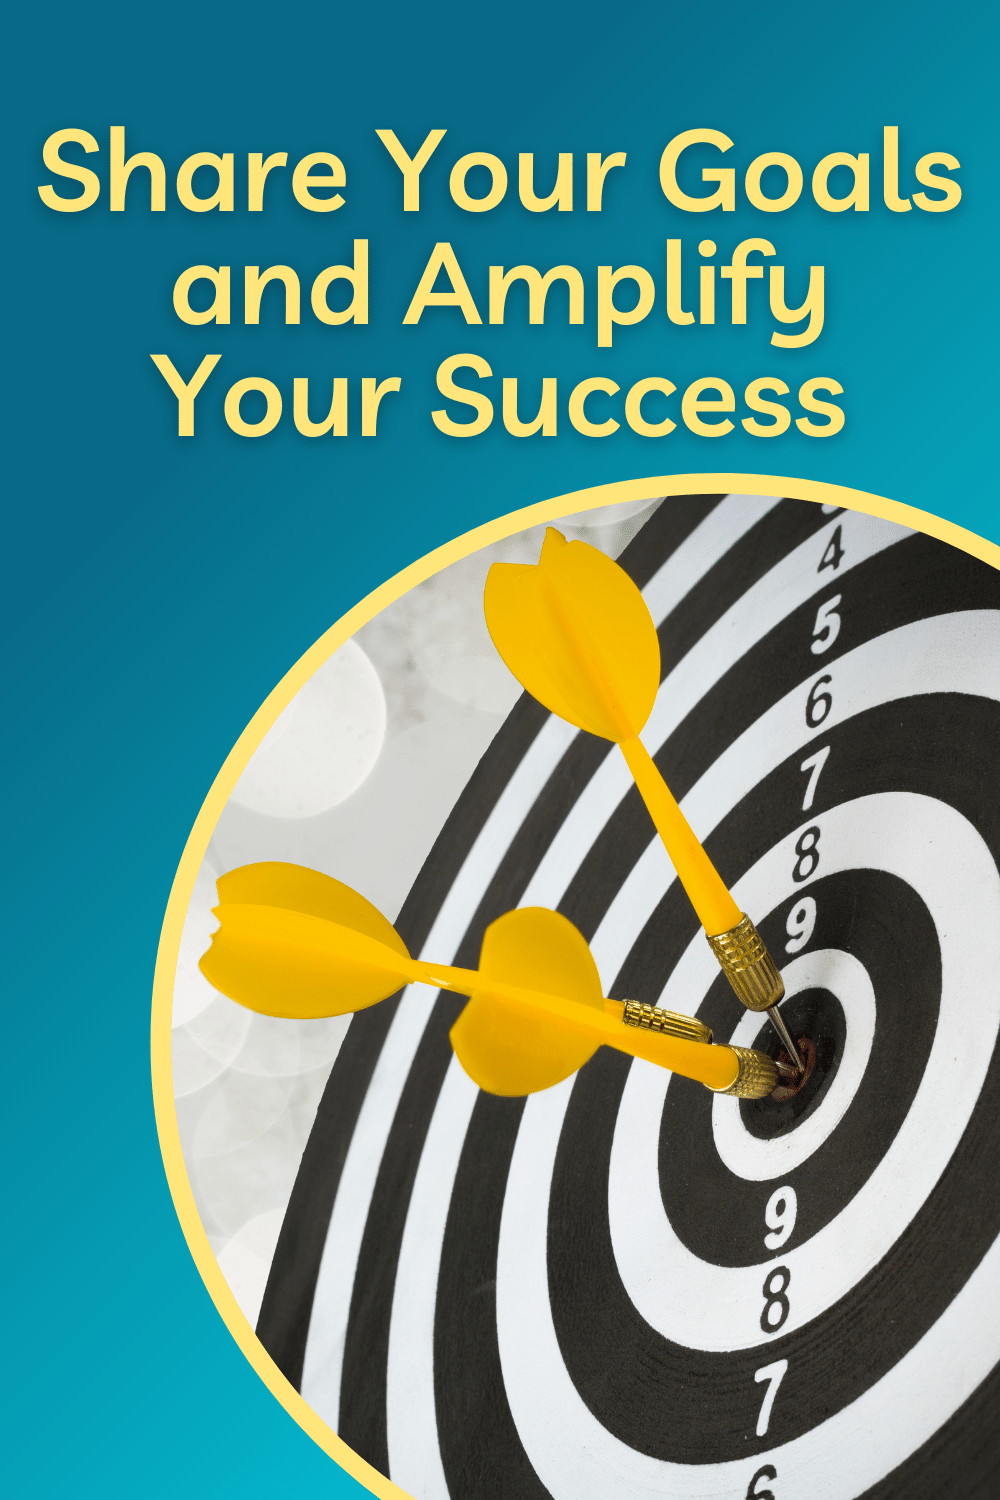 Share Your Goals and Amplify Your Success